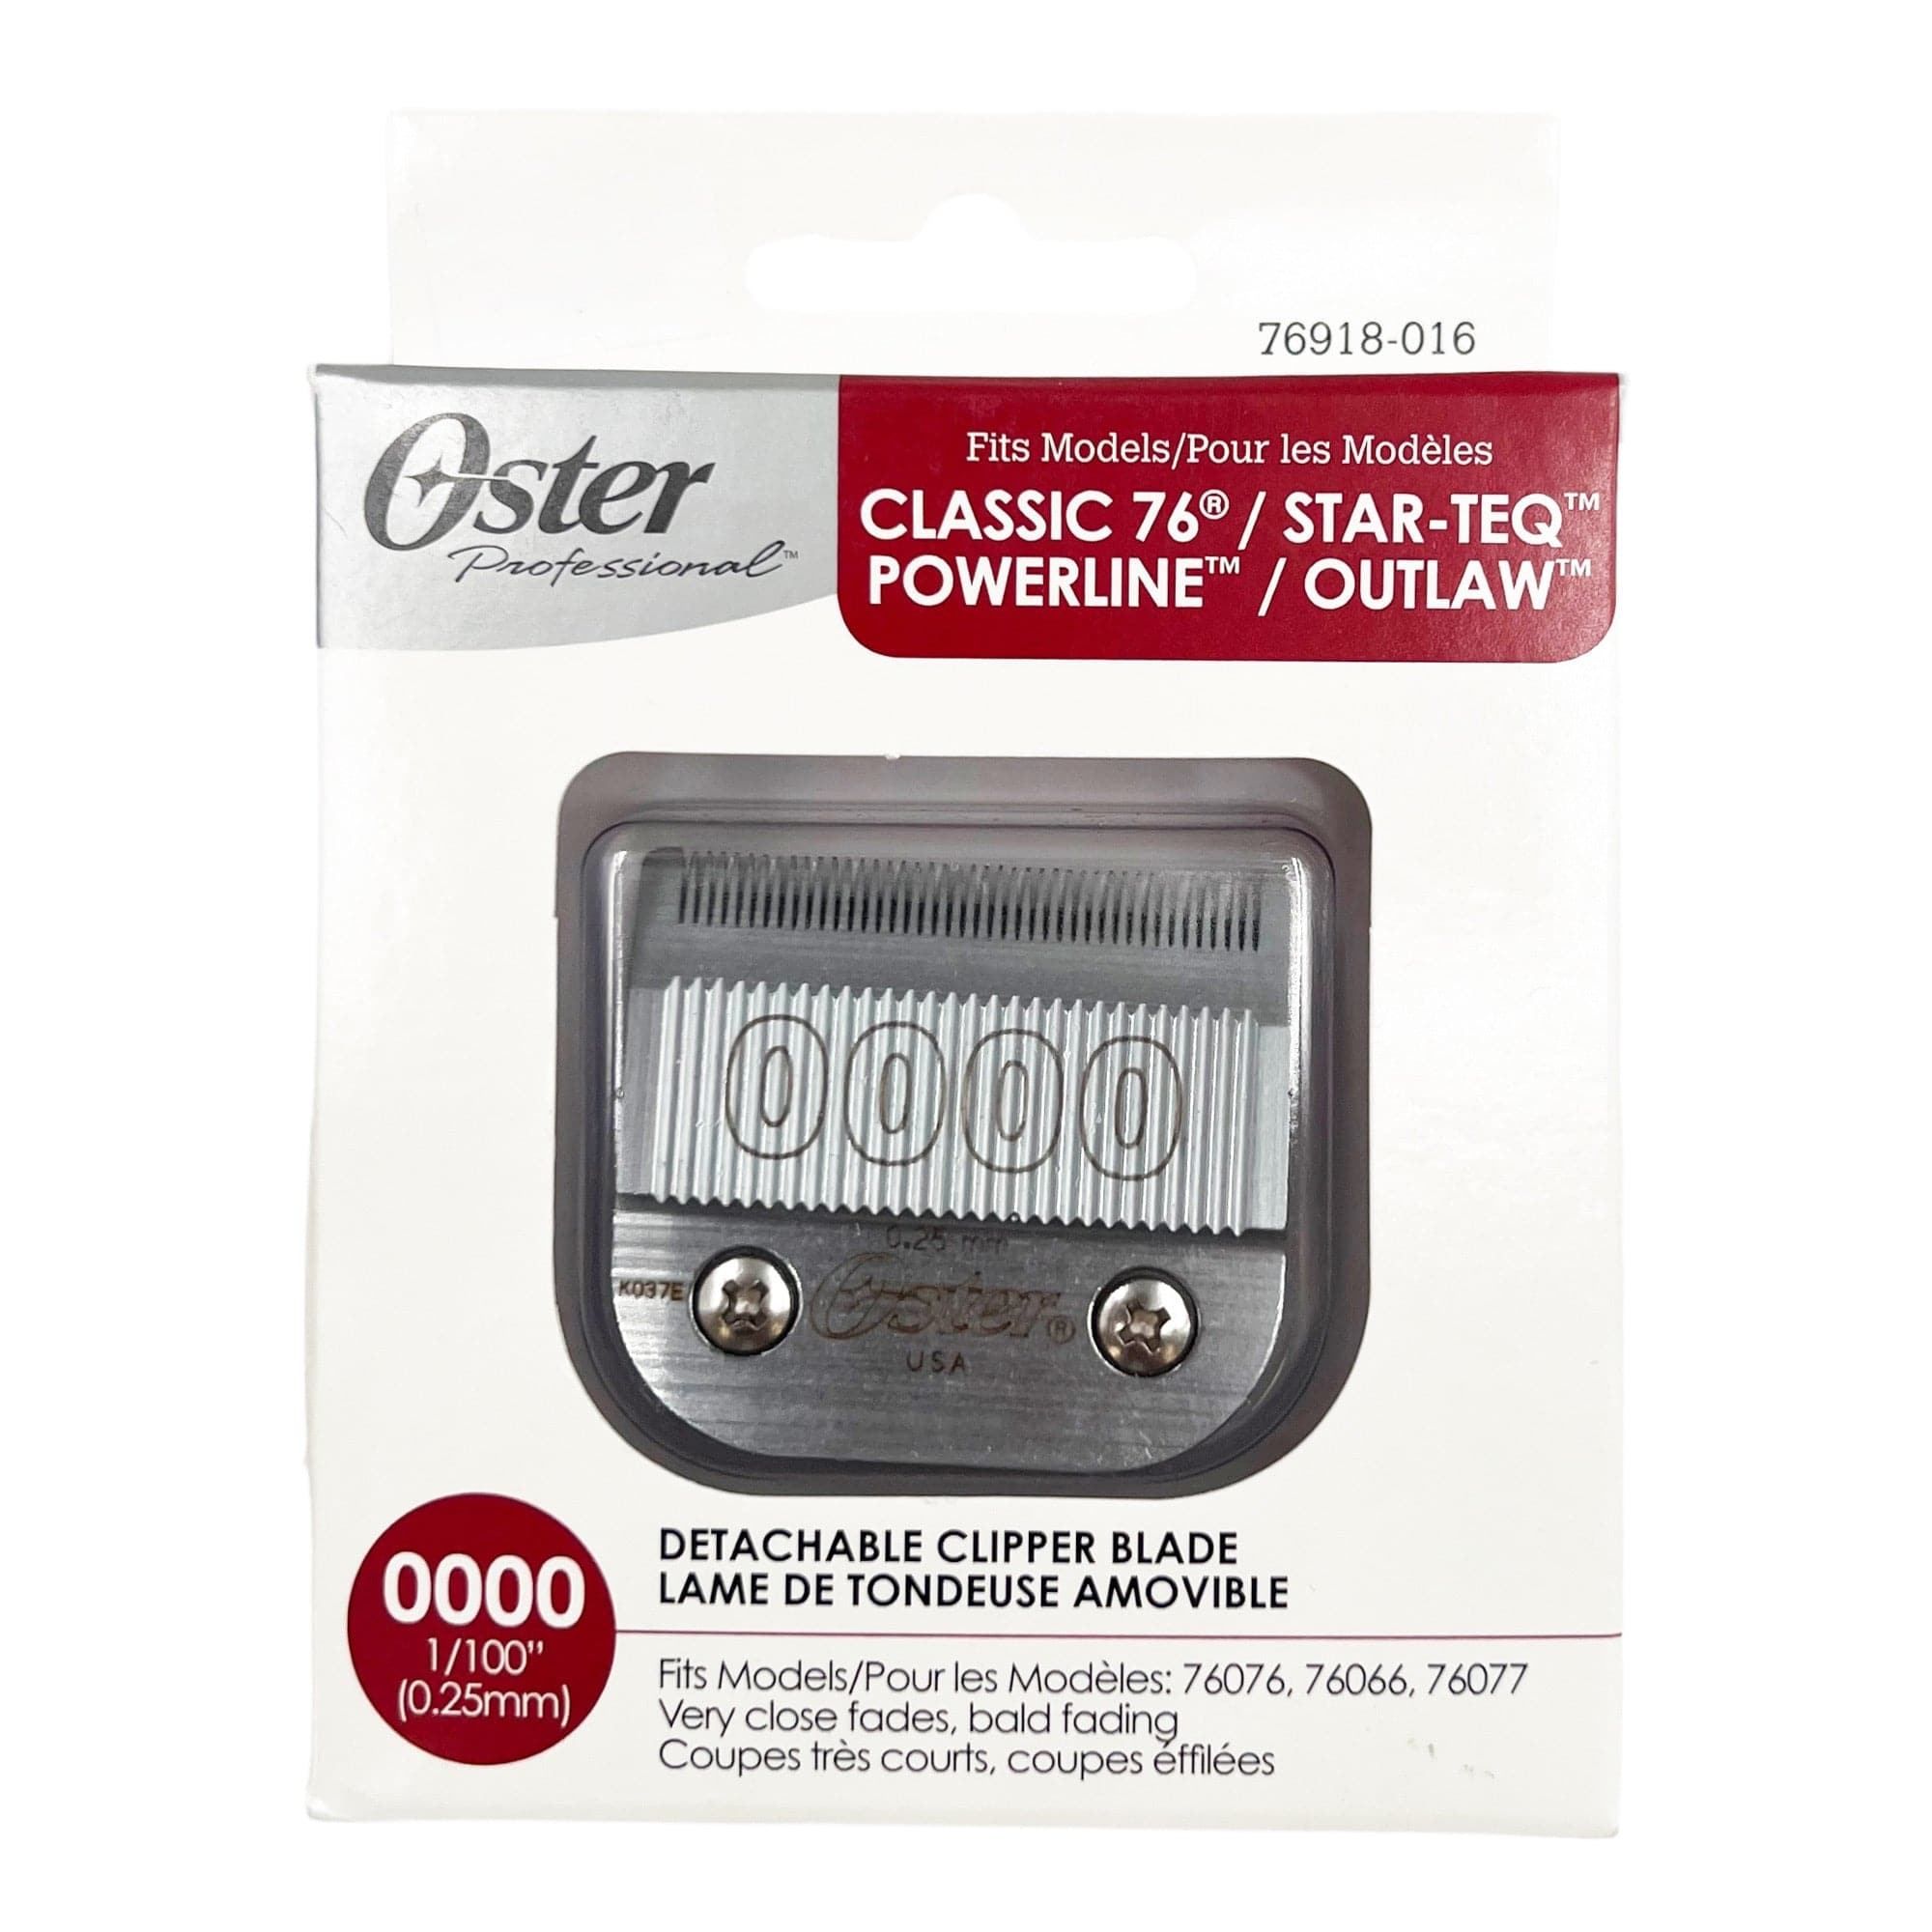 Oster - 076918-016 Detachable Blade Size 0000 - 0.25mm